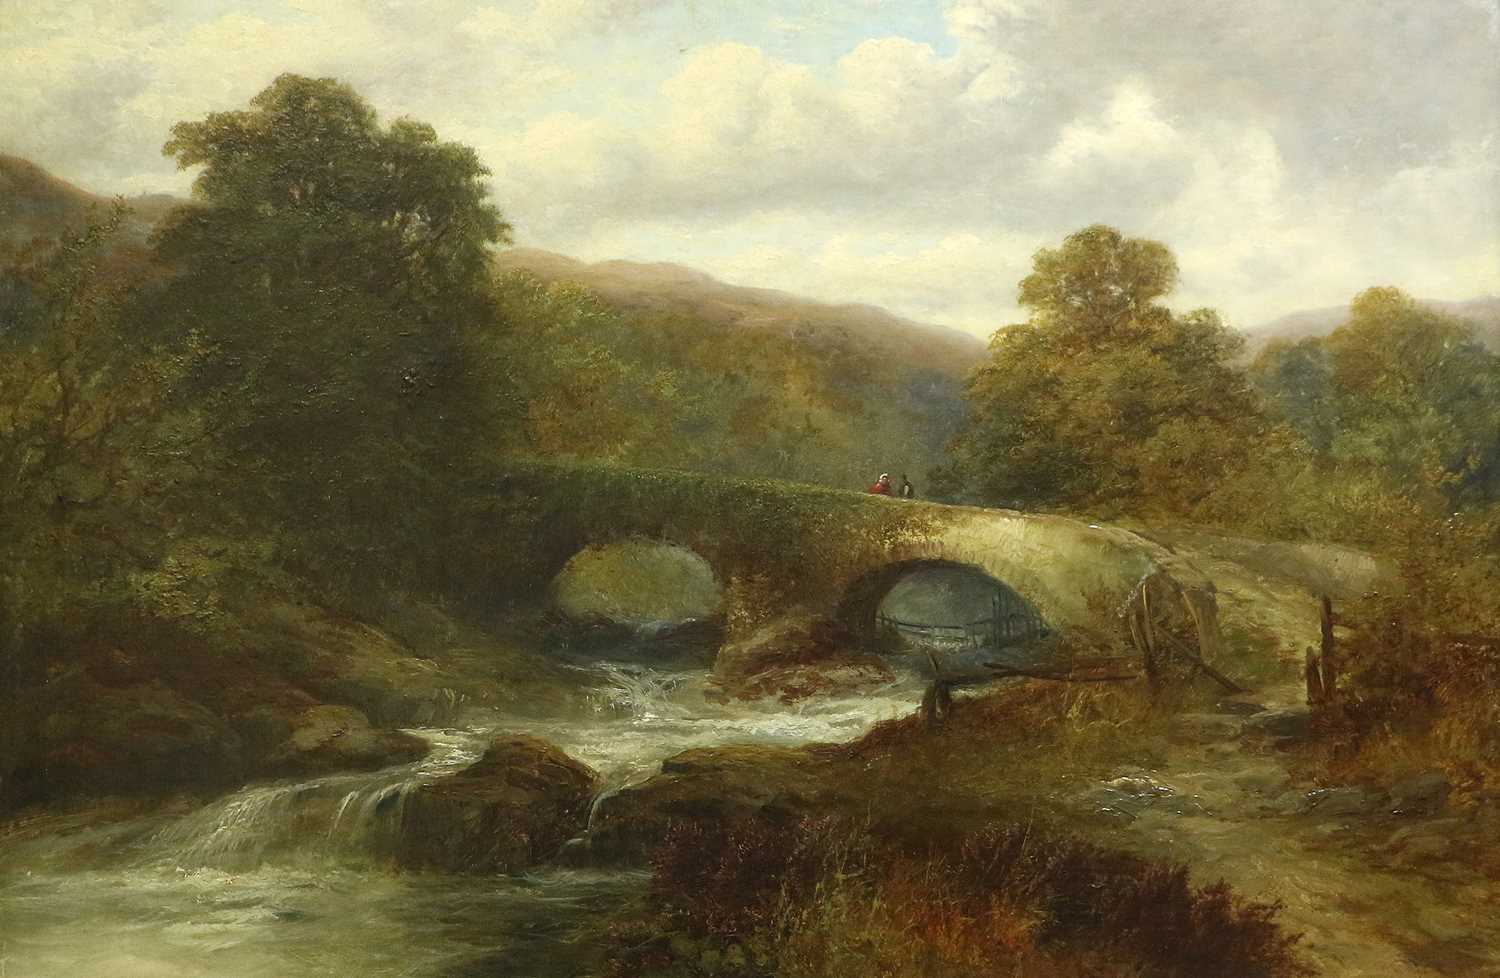 Attributed to William Mellor (1851-1931) "On the Esk, Yorkshire" Oil on canvas, 49.5cm by 69.5cm